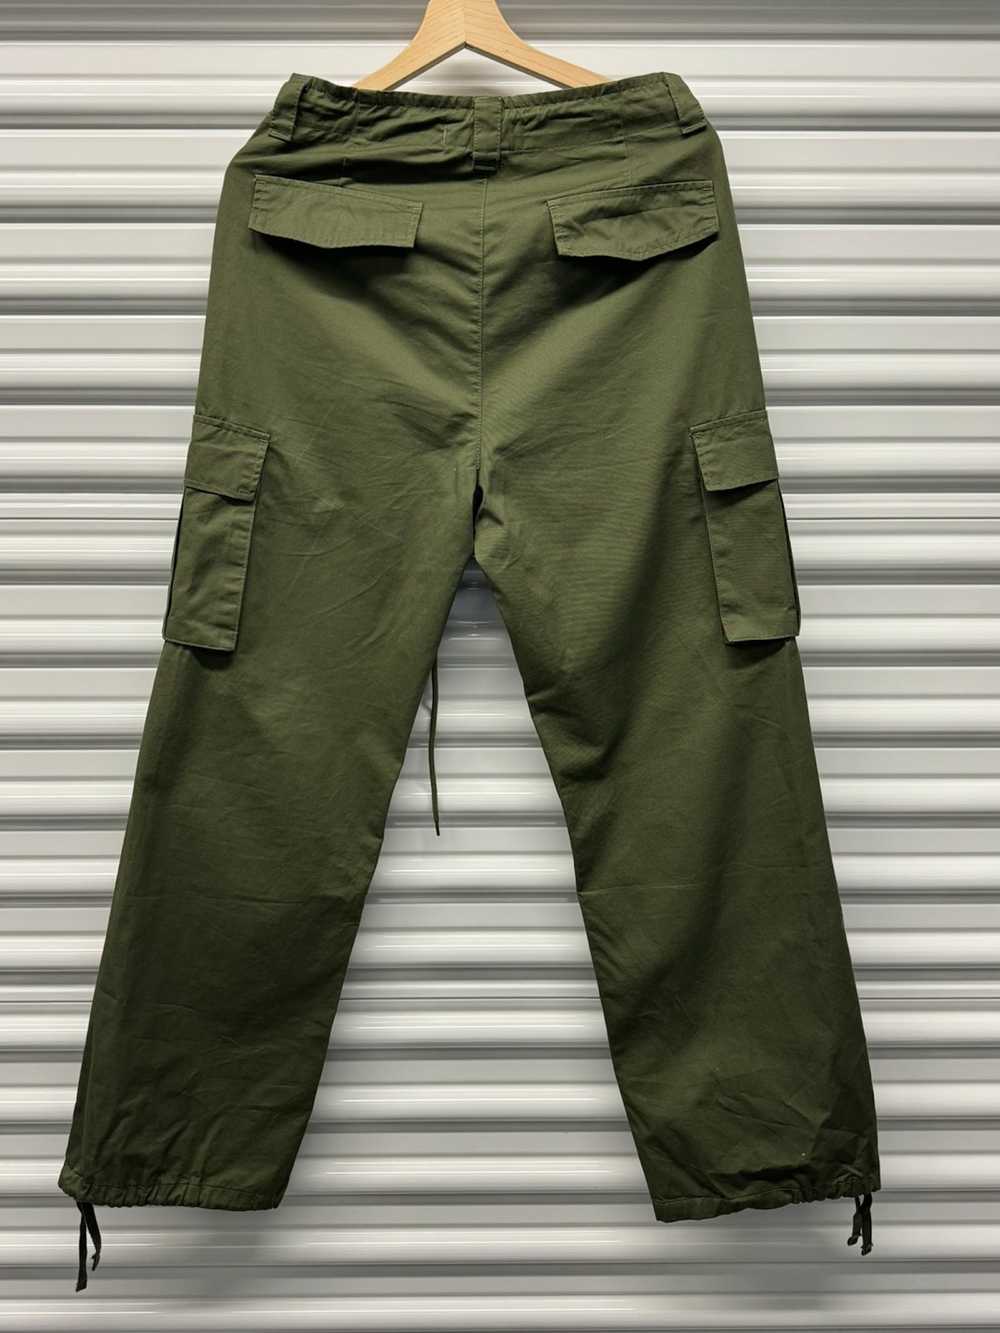 Vintage Military style cargo pants - image 2